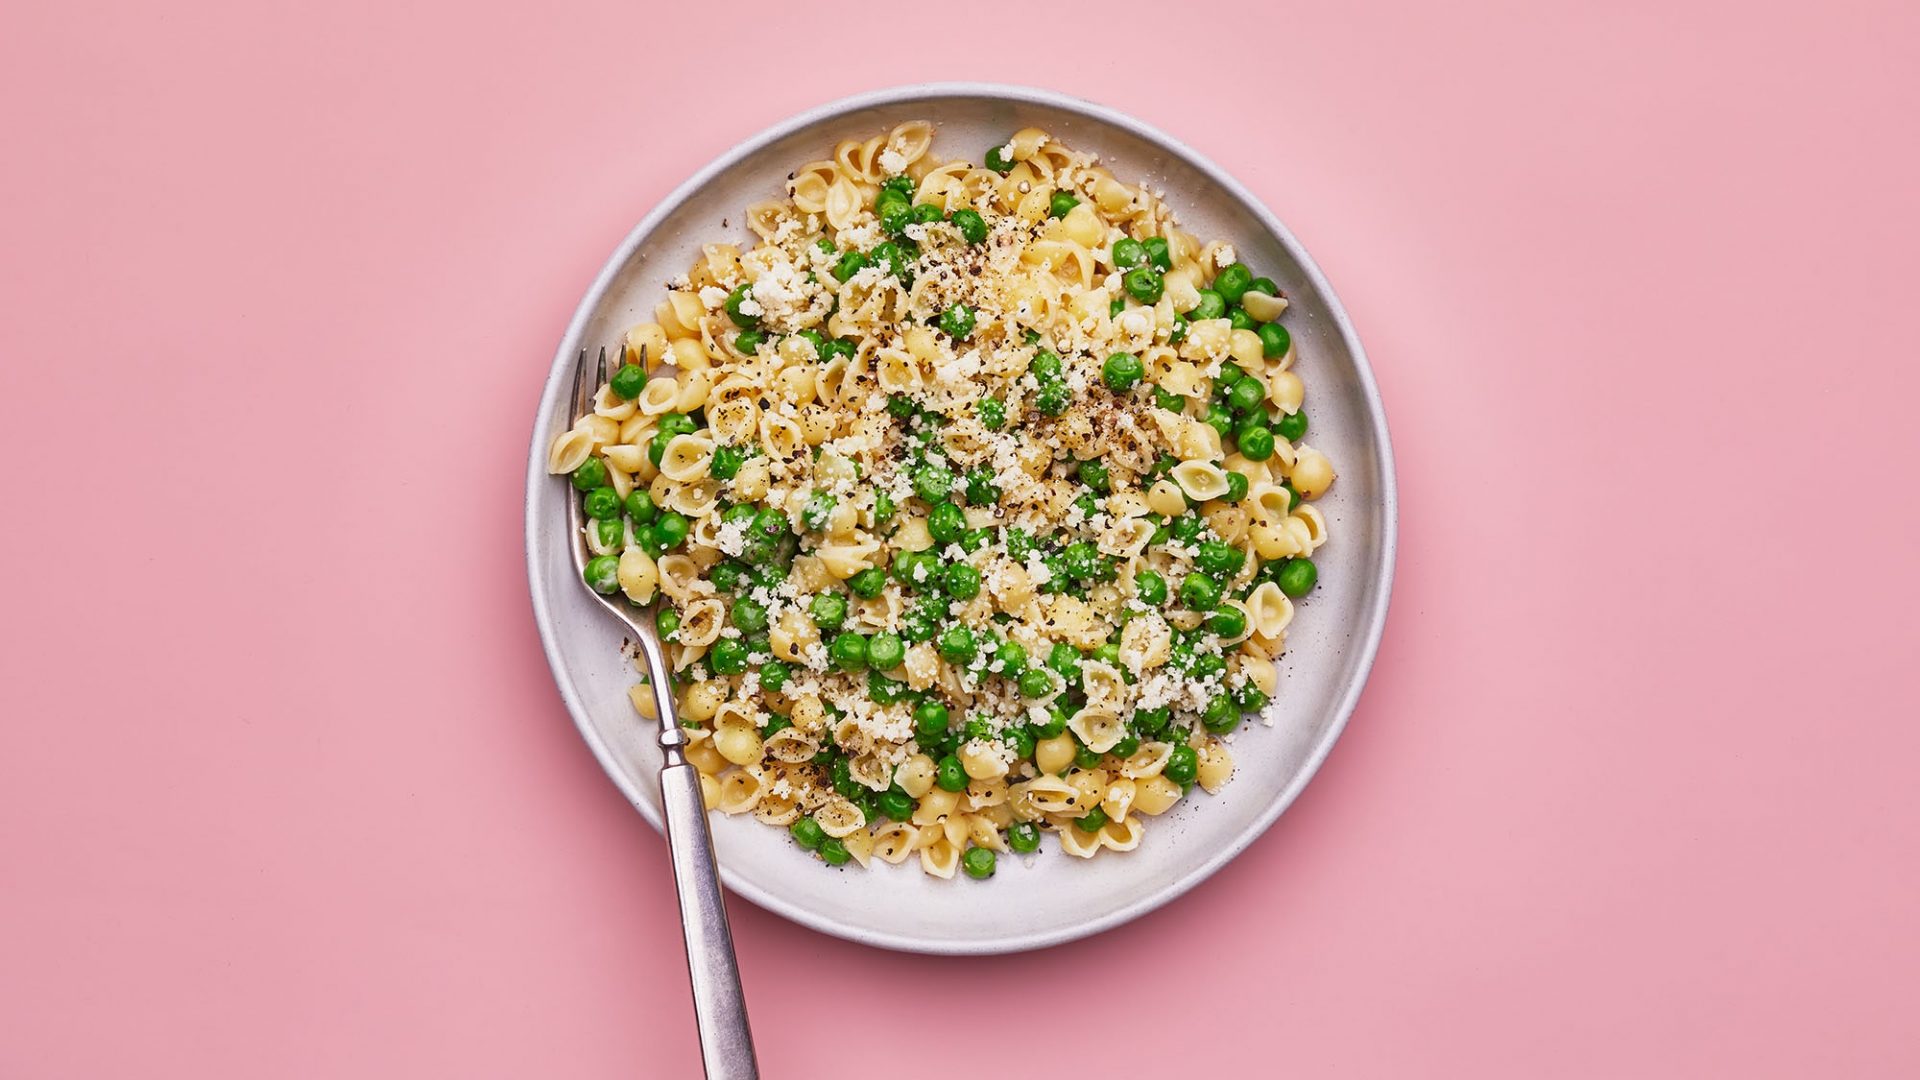 Macaroni and Peas Is the Desperation Meal That Continually Satisfies